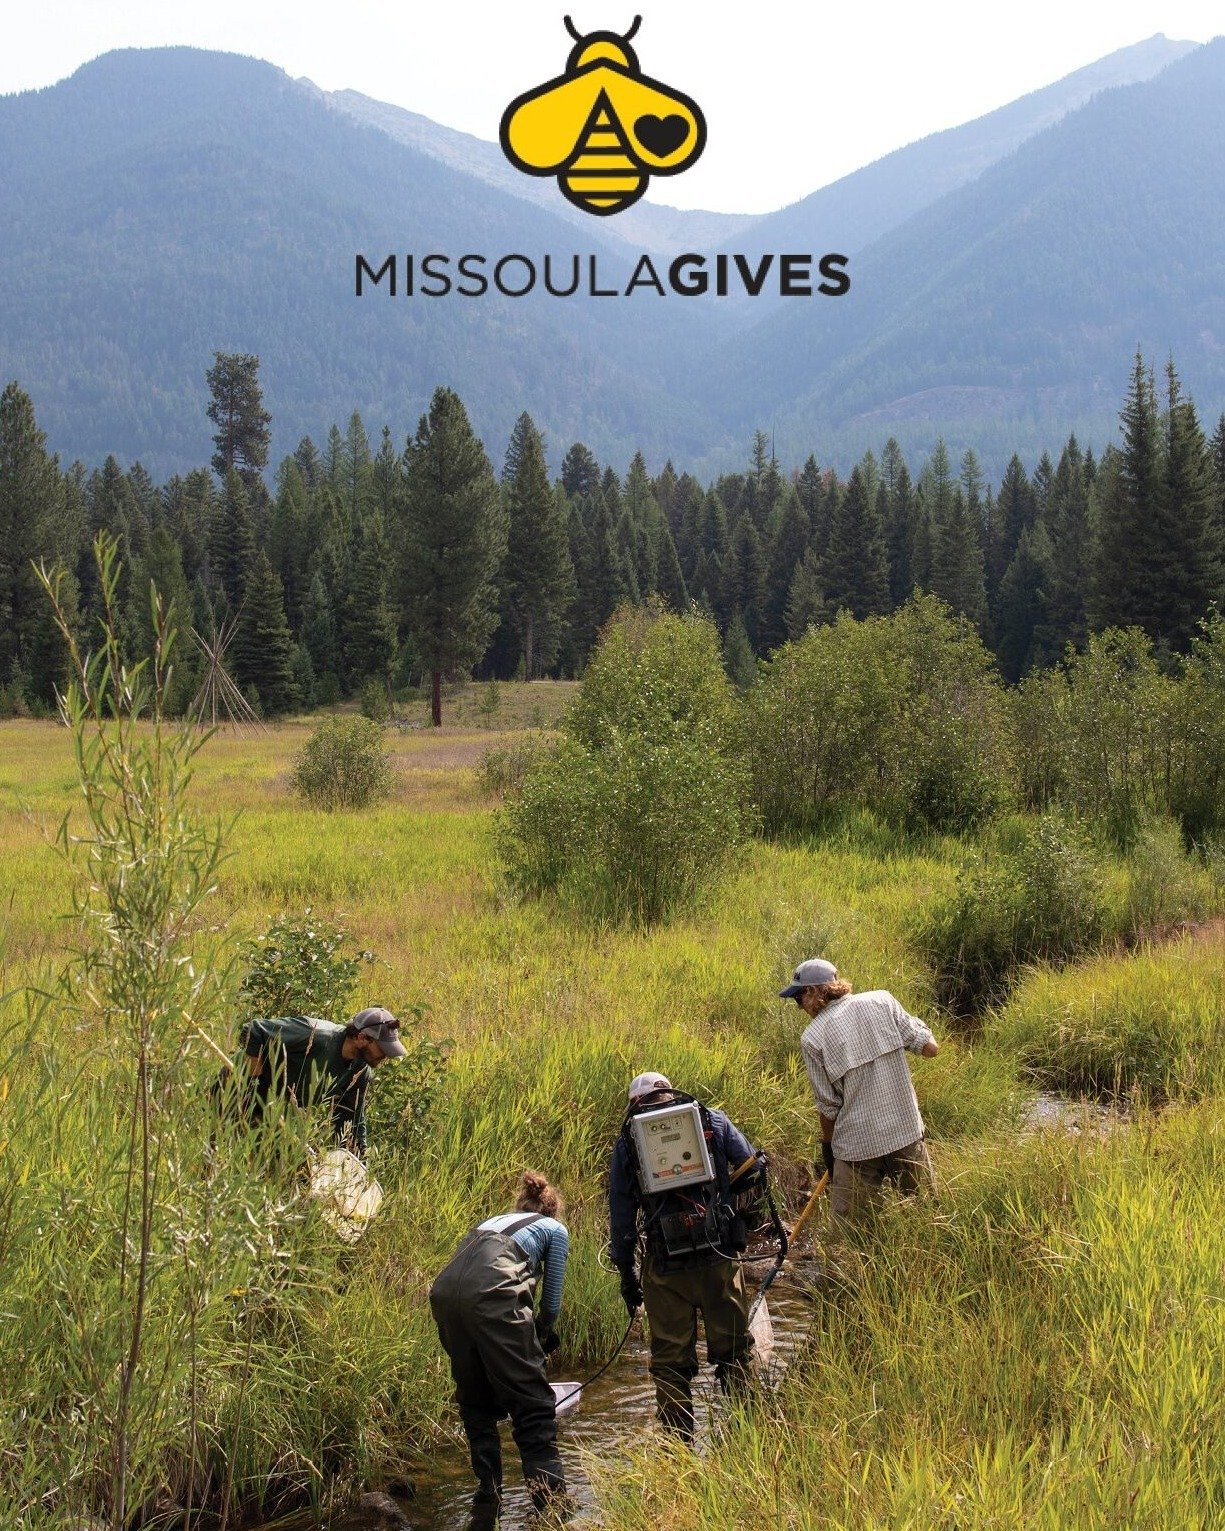 Many thanks to our supporters during the annual Missoula Gives Fundraiser. Each donation means the world to us and helps us to make real impact in the conservation and experiential education worlds in the Swan Valley and beyond.⁣
⁣
#Missoulagives #gr